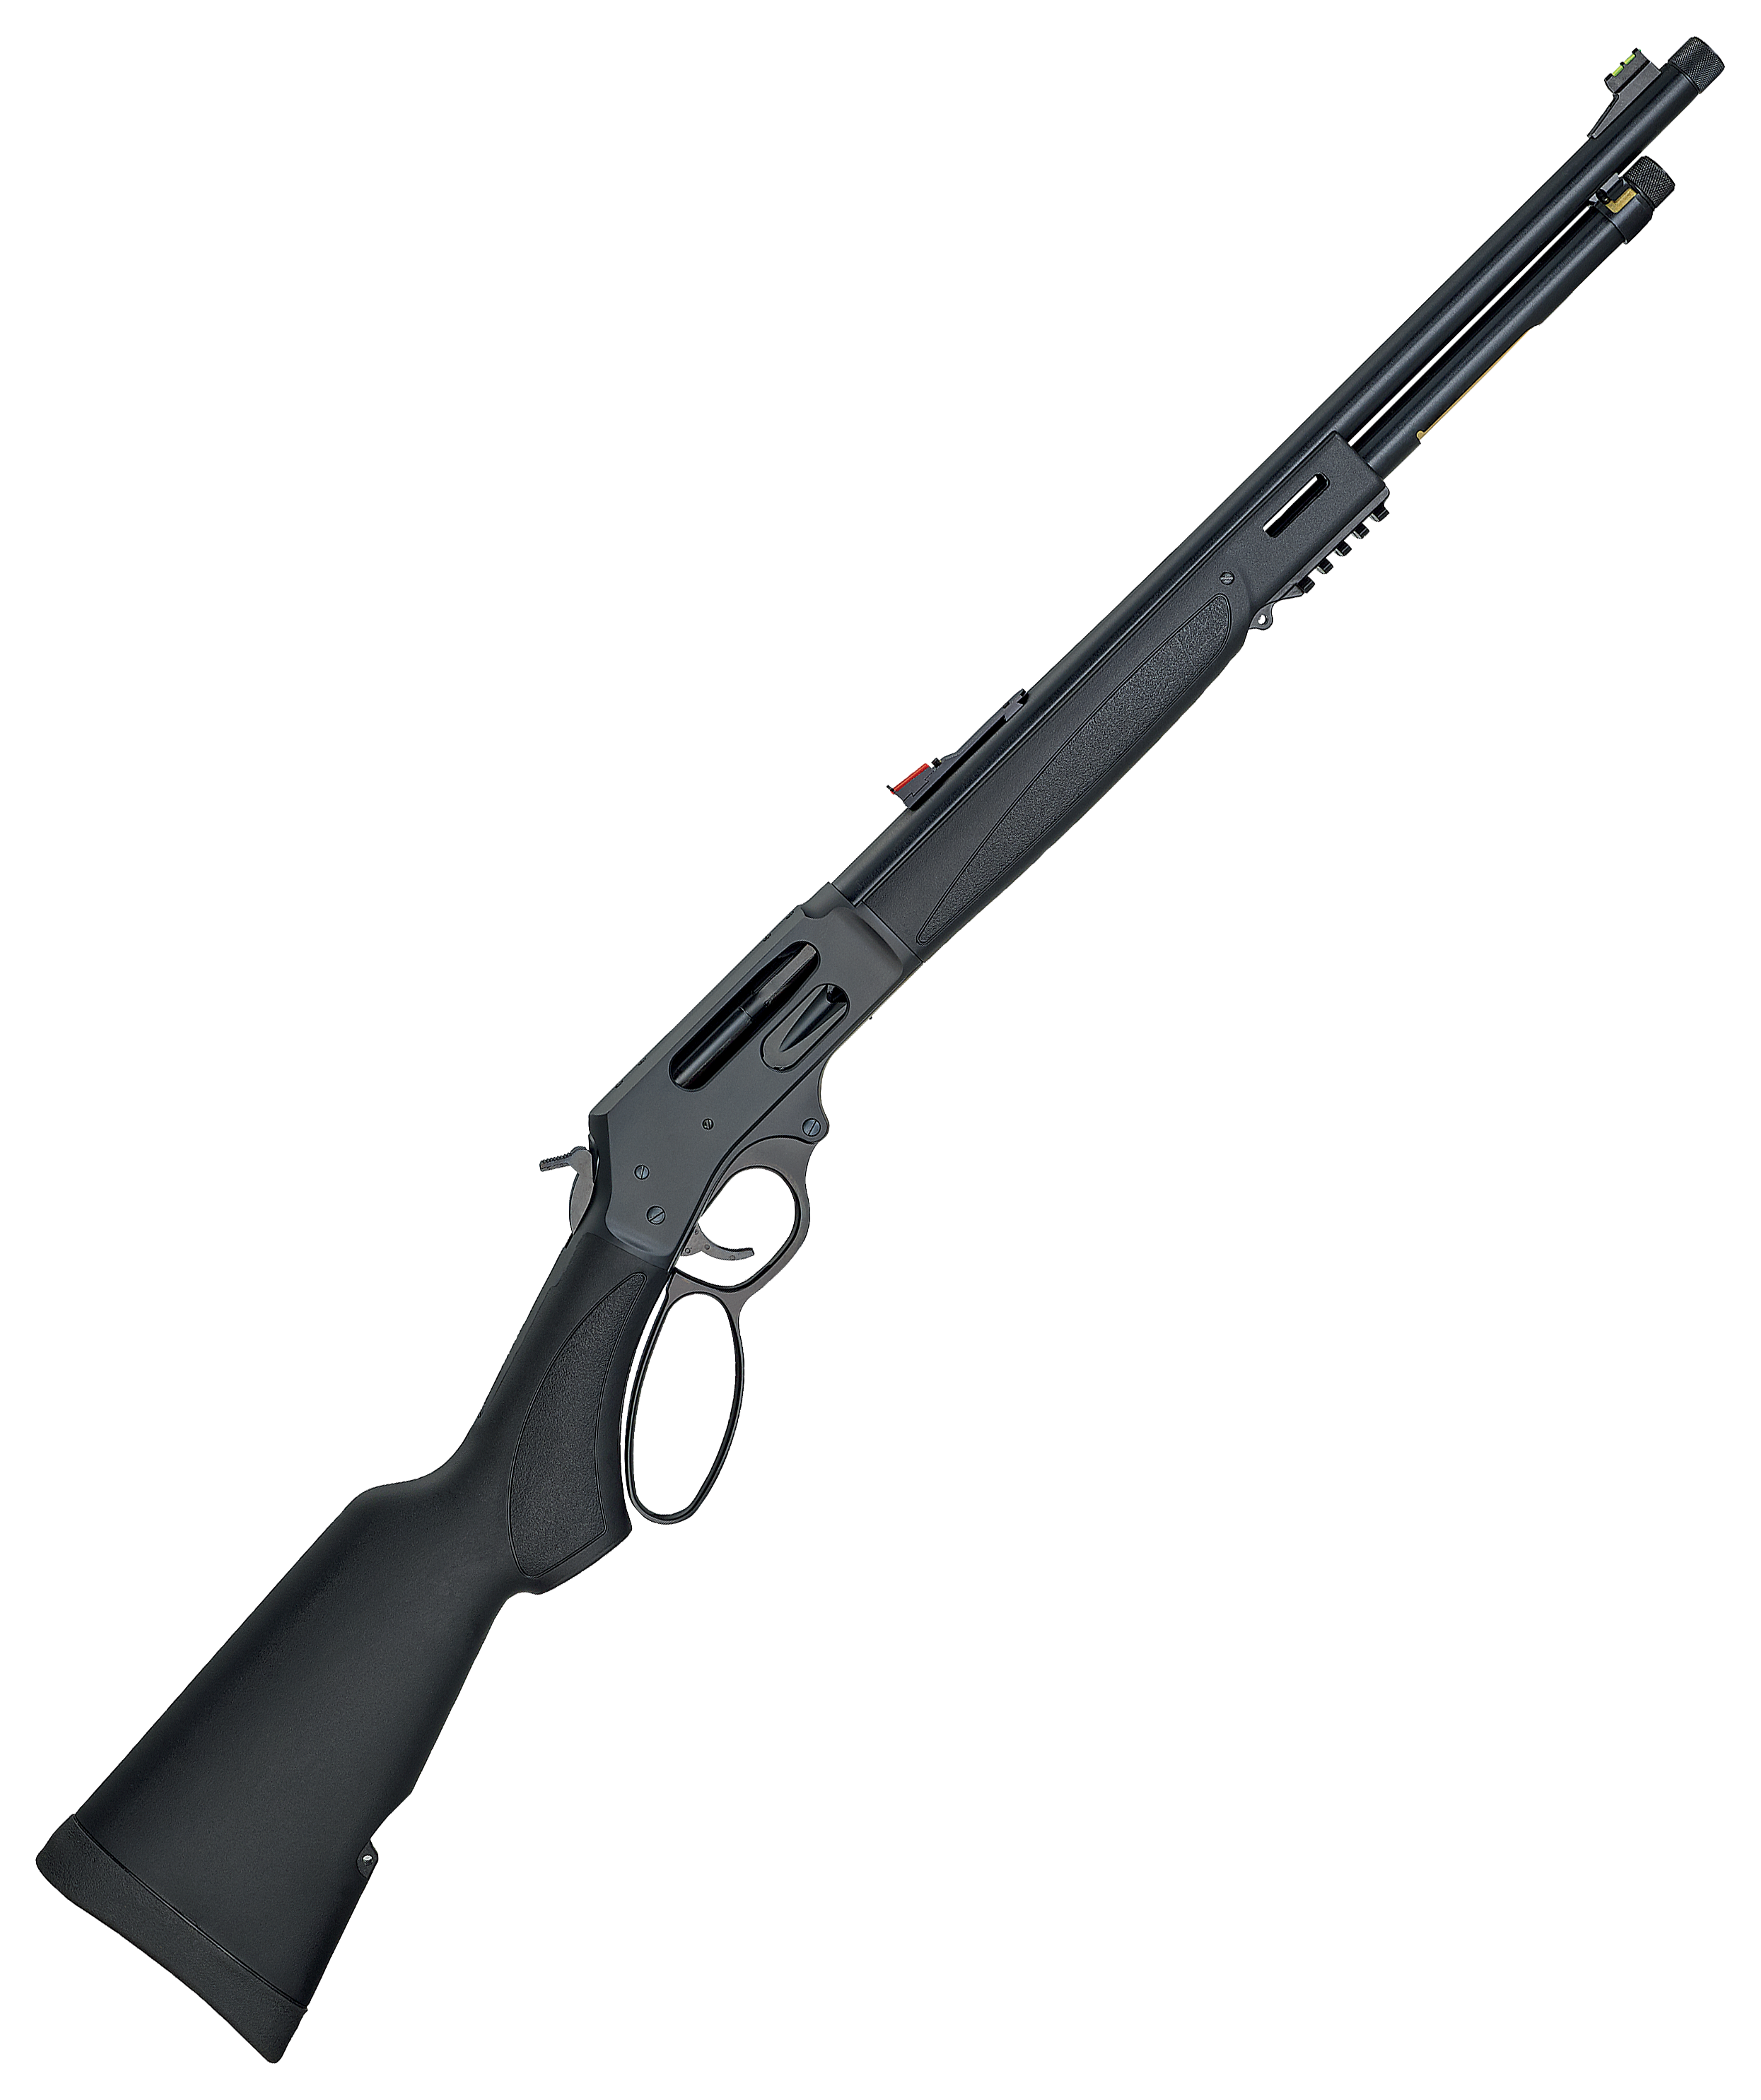 Henry Lever Action X Model Blued Steel Lever Action Rifle - 360 Buckhammer - 21.375in - Black -  H009X-360BH